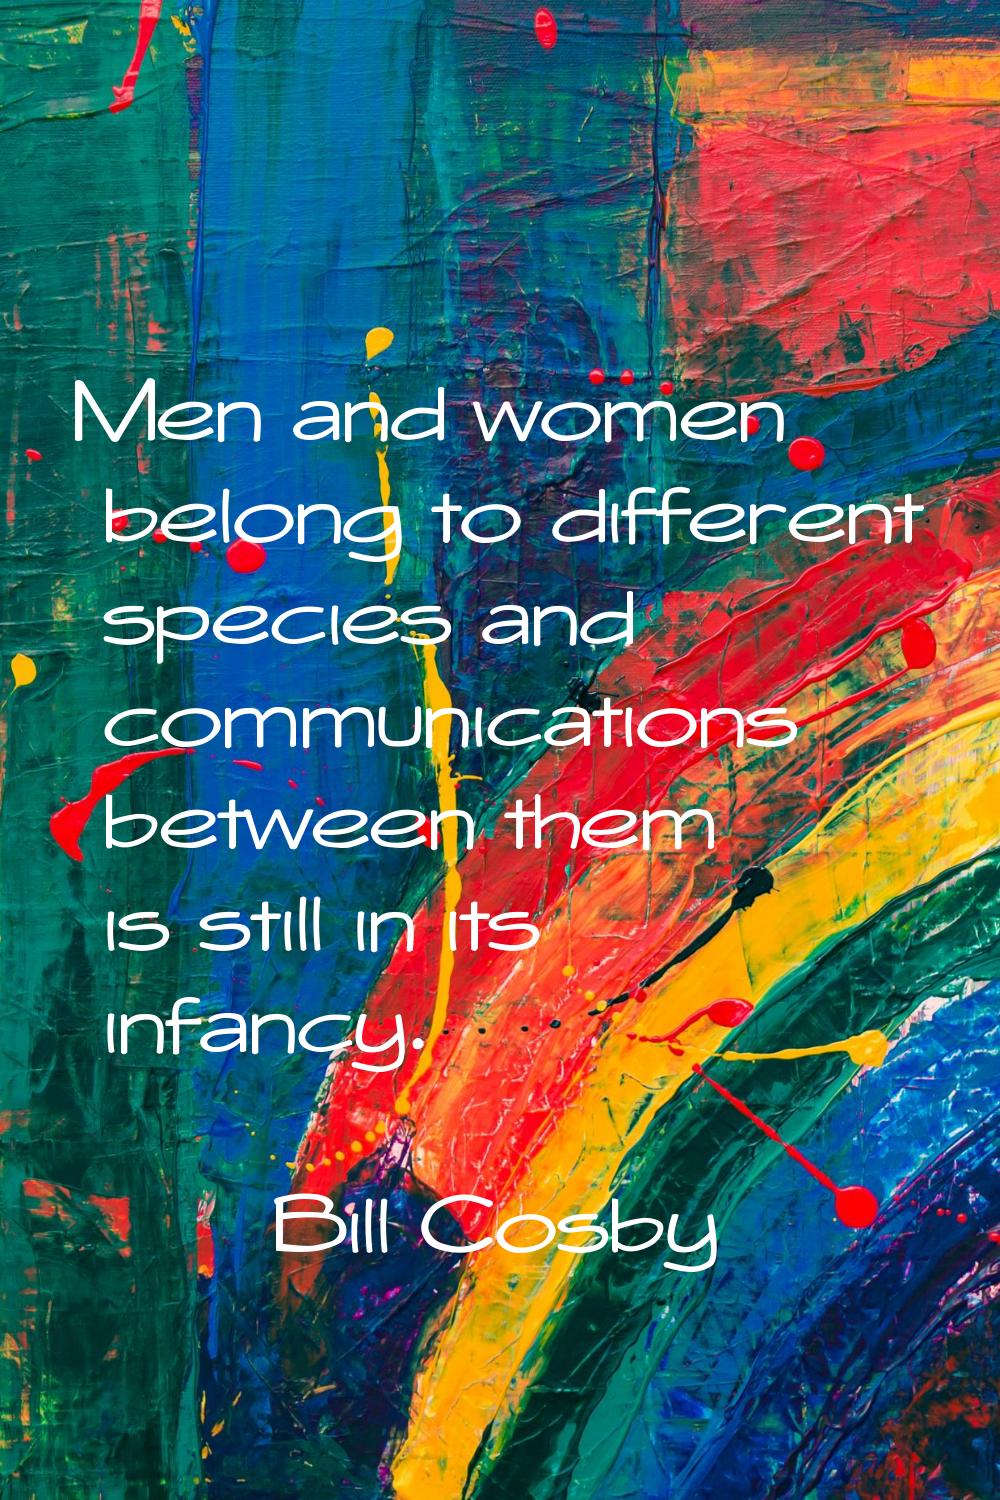 Men and women belong to different species and communications between them is still in its infancy.